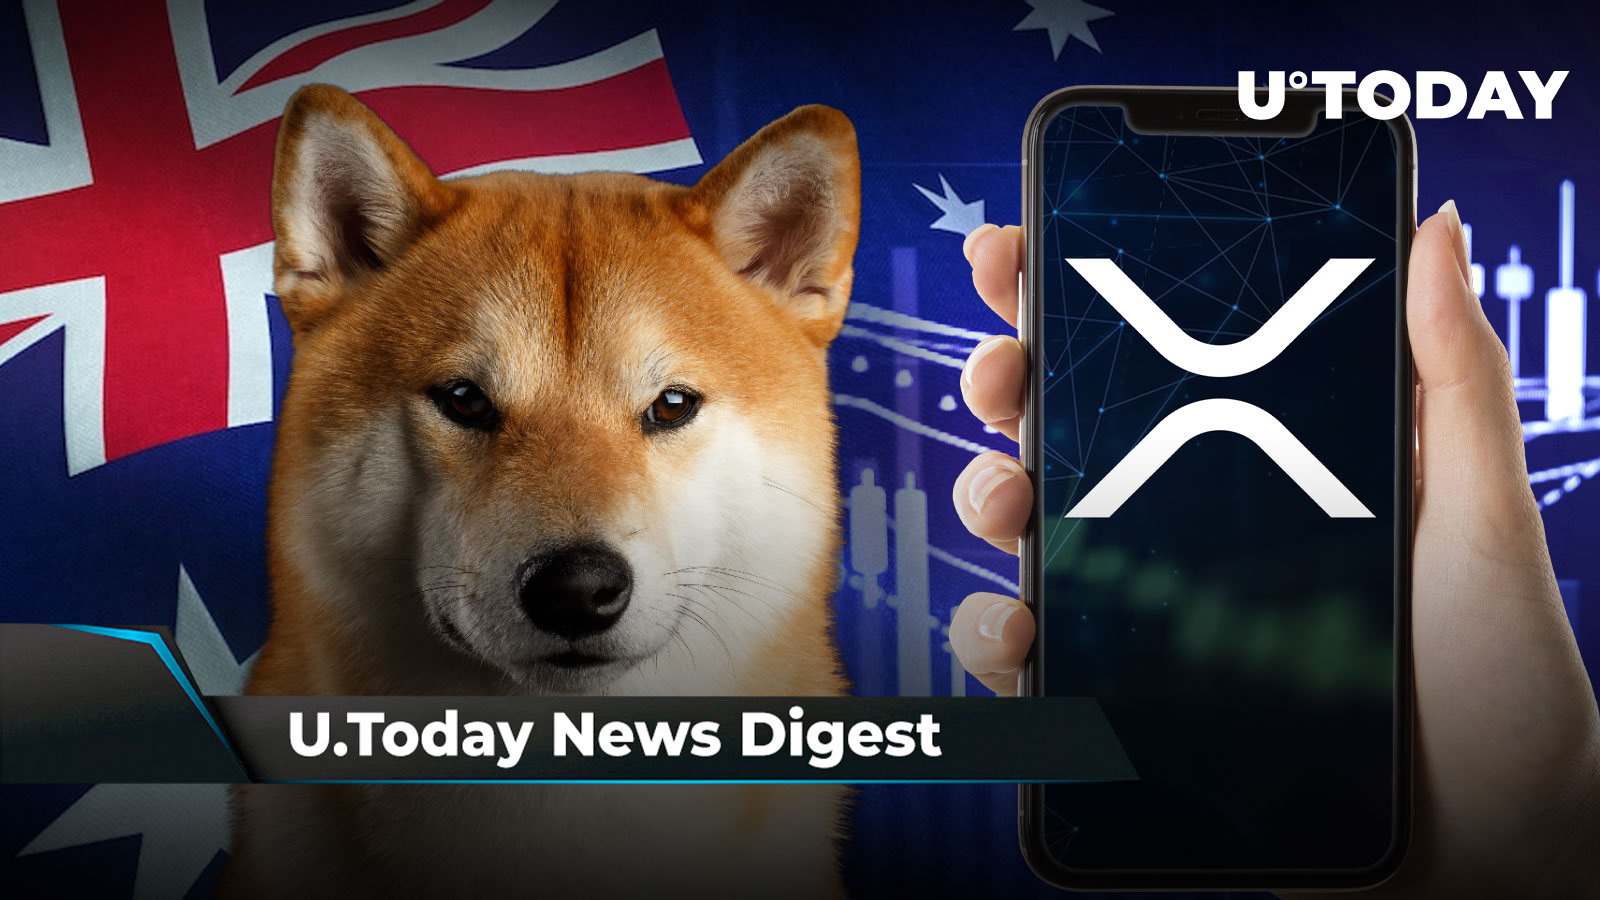 Shiba Eternity Launched in Australia, XRP Suddenly Jumps 8%, President Who Lost  Million in BTC Seeks Reelection: Crypto News Digest by U.Today